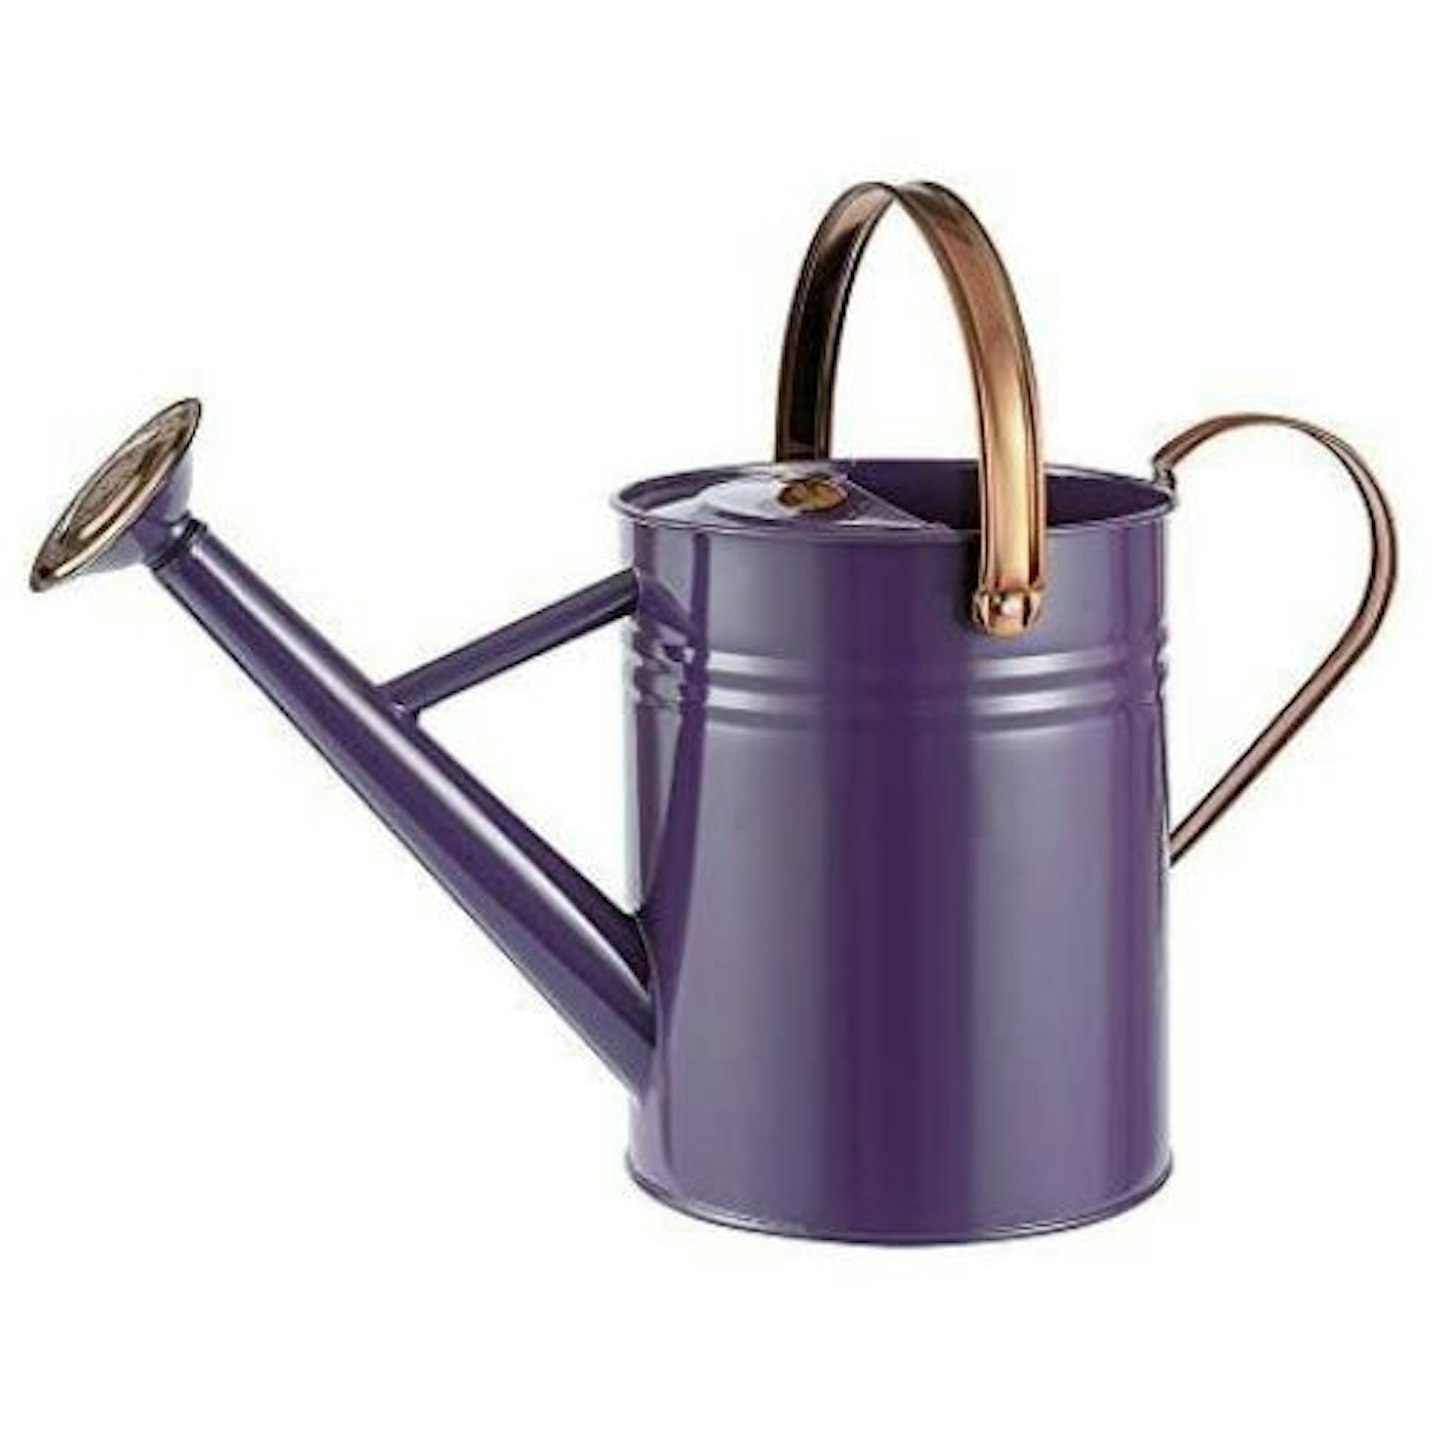 best-watering-cans-uk-new-moulton-mill-watering-can